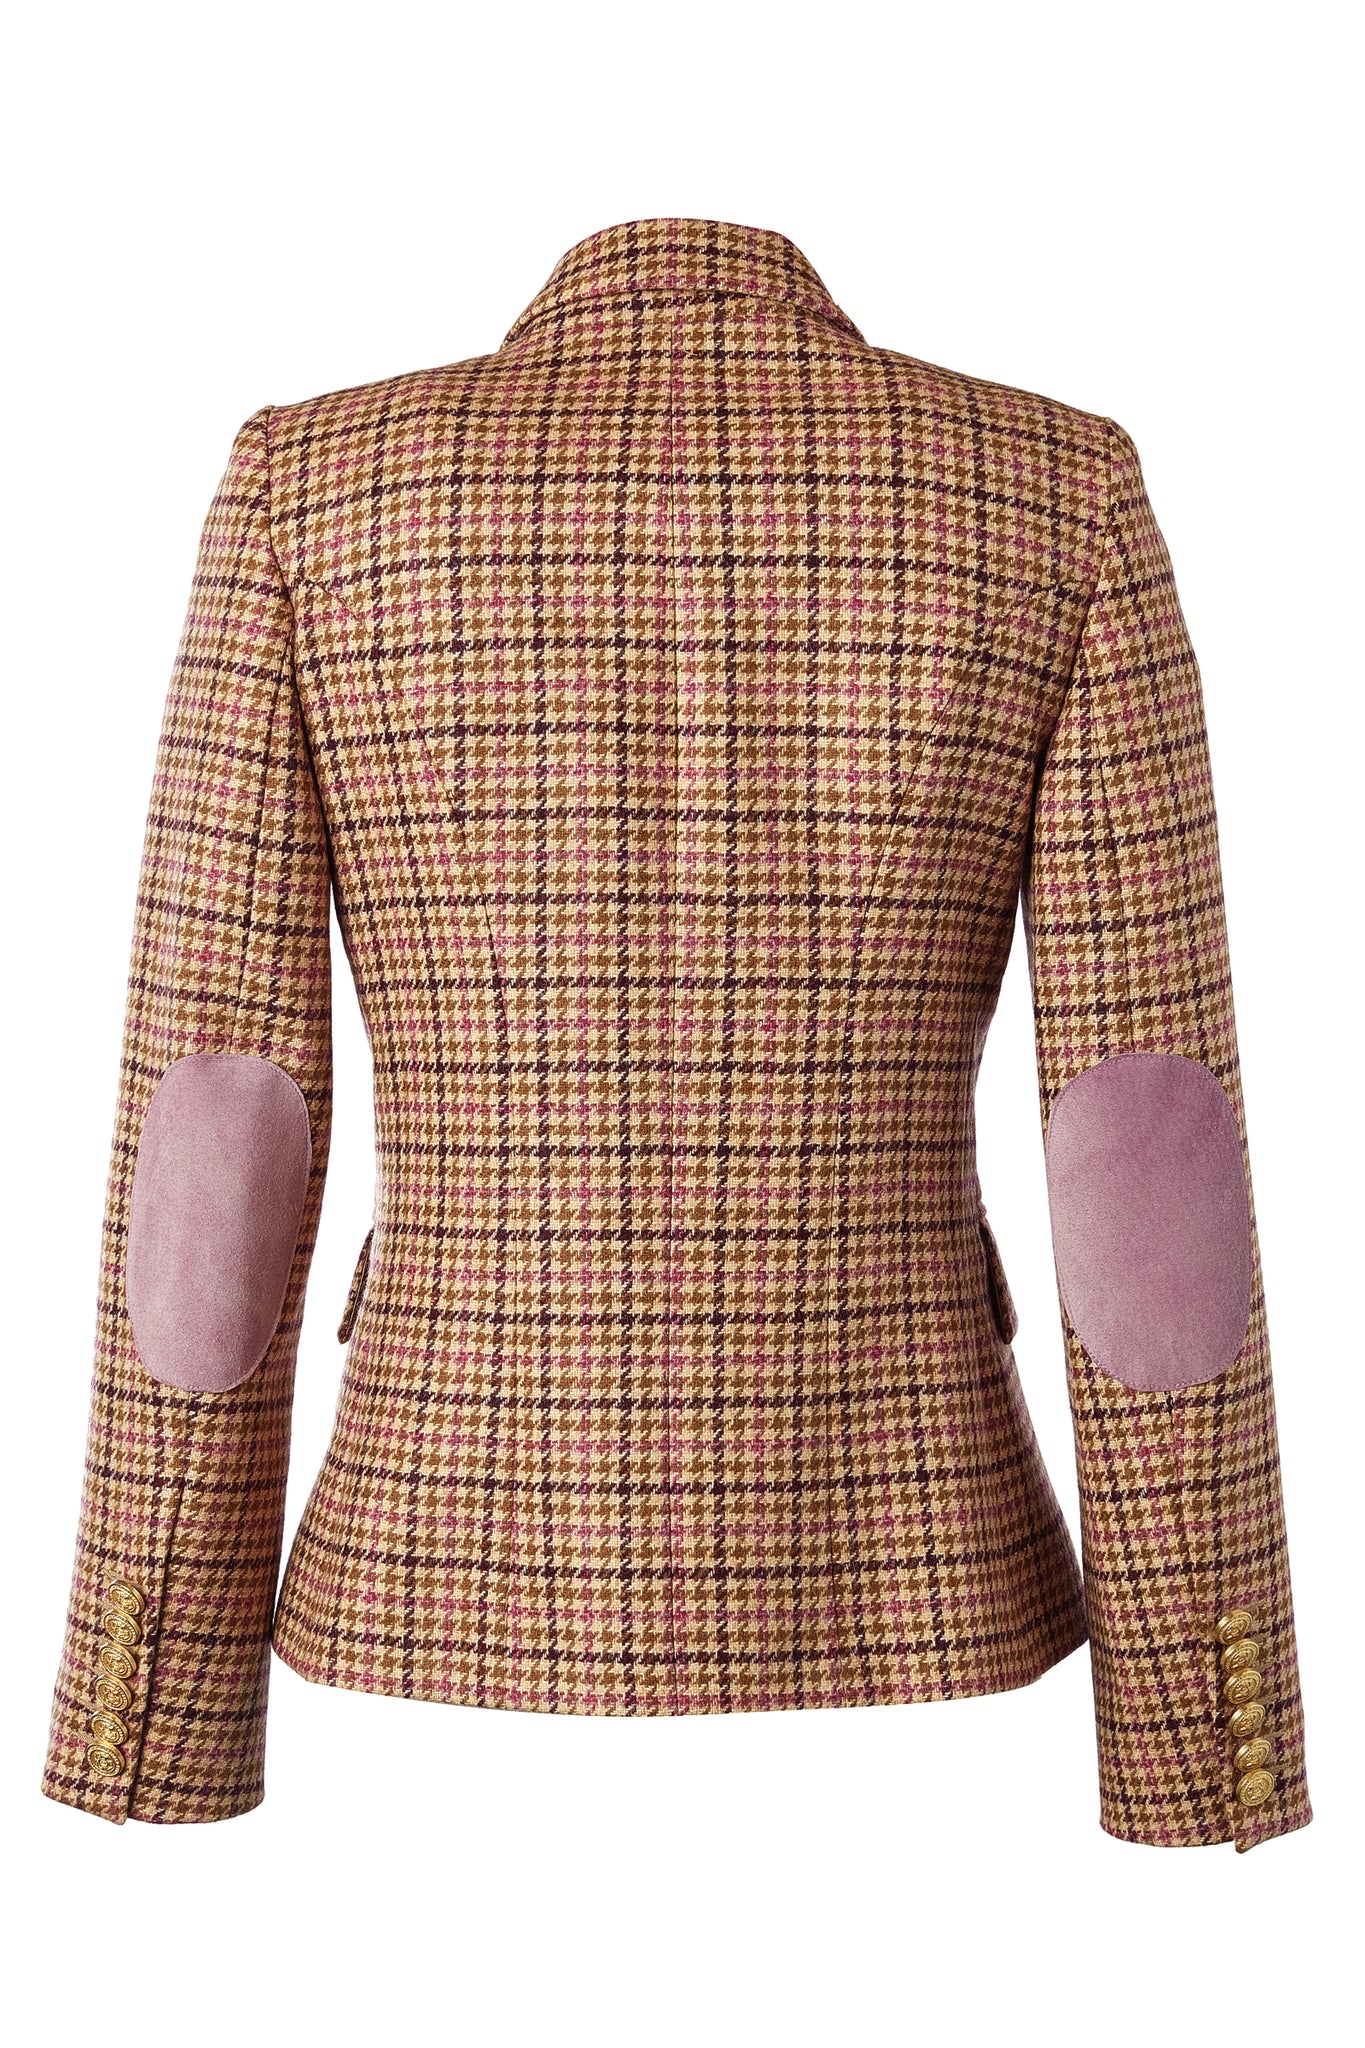 back of British made double breasted blazer that fastens with a single button hole to create a more form fitting silhouette with two pockets and gold button detailing this blazer is made from pink purple and brown check houndstooth fabric